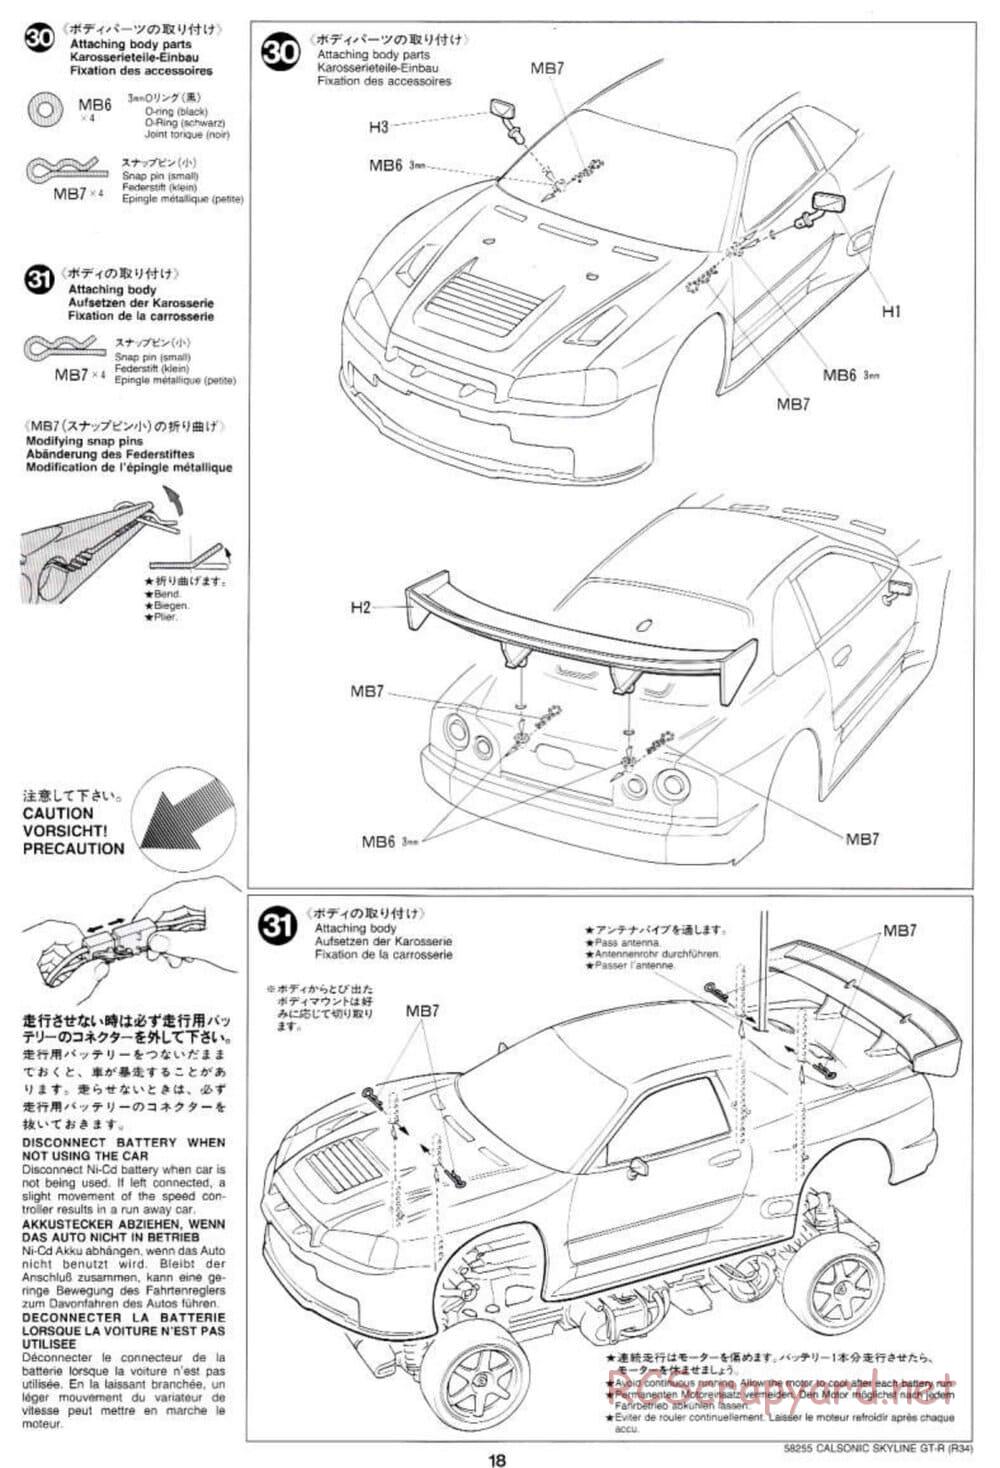 Tamiya - Calsonic Skyline GT-R (R34) - TL-01 Chassis - Manual - Page 18